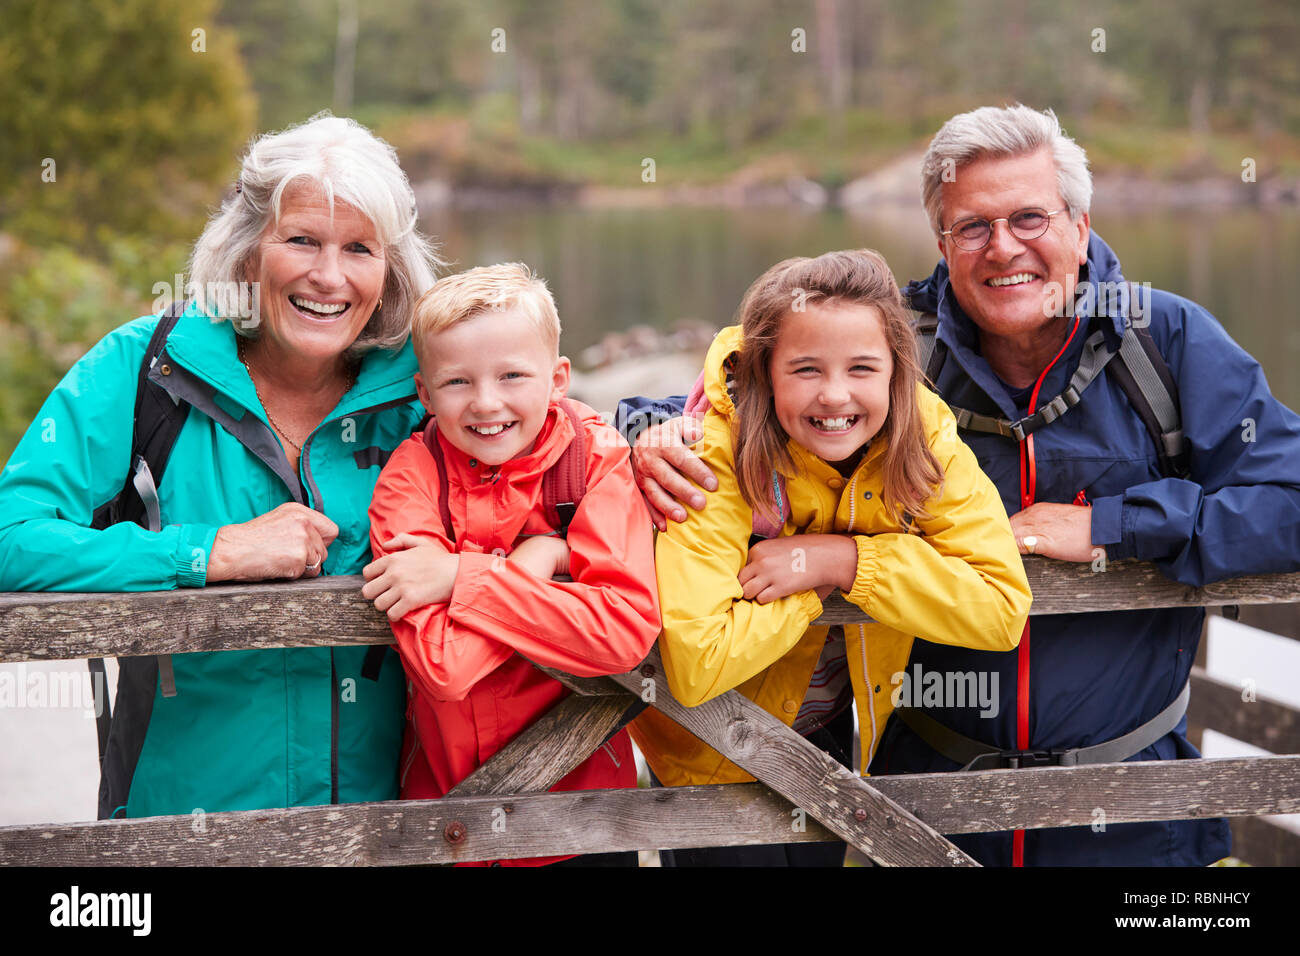 Grandparents and grandchildren leaning on a wooden fence in the countryside laughing, Lake District, UK Stock Photo